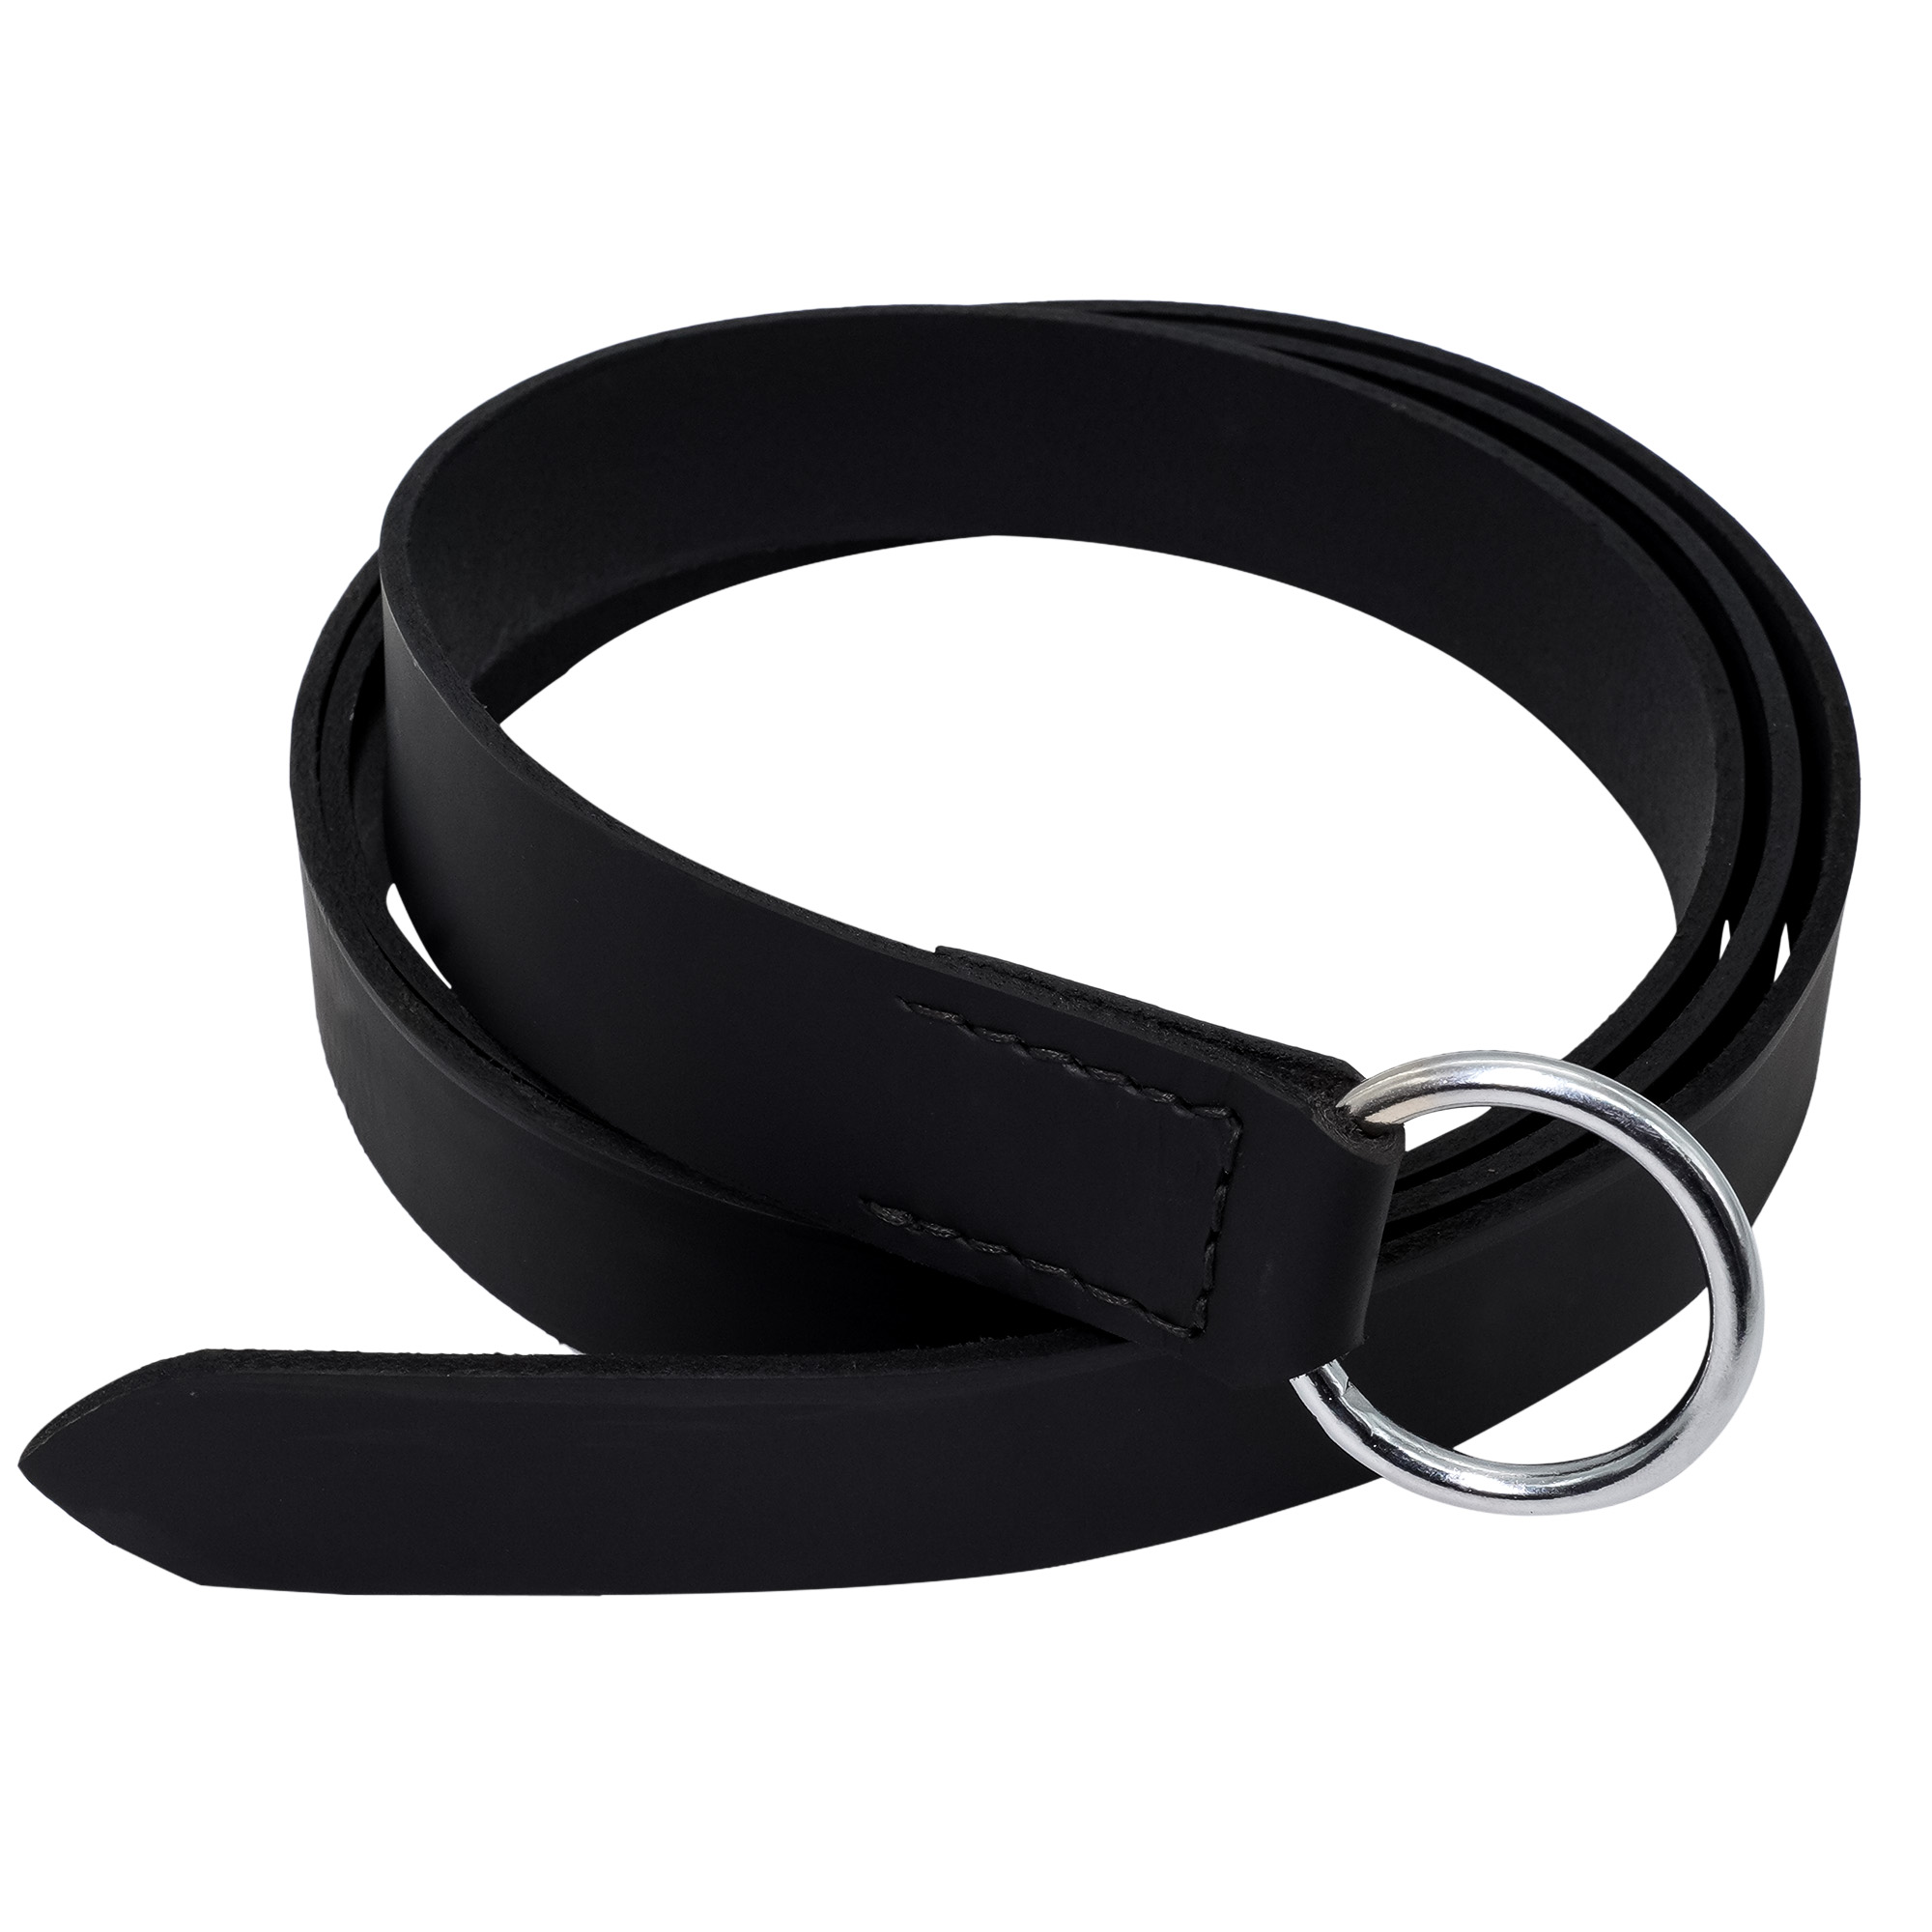 Lustrous Steel Ring Buckle Leather Belt by Lord of Battles